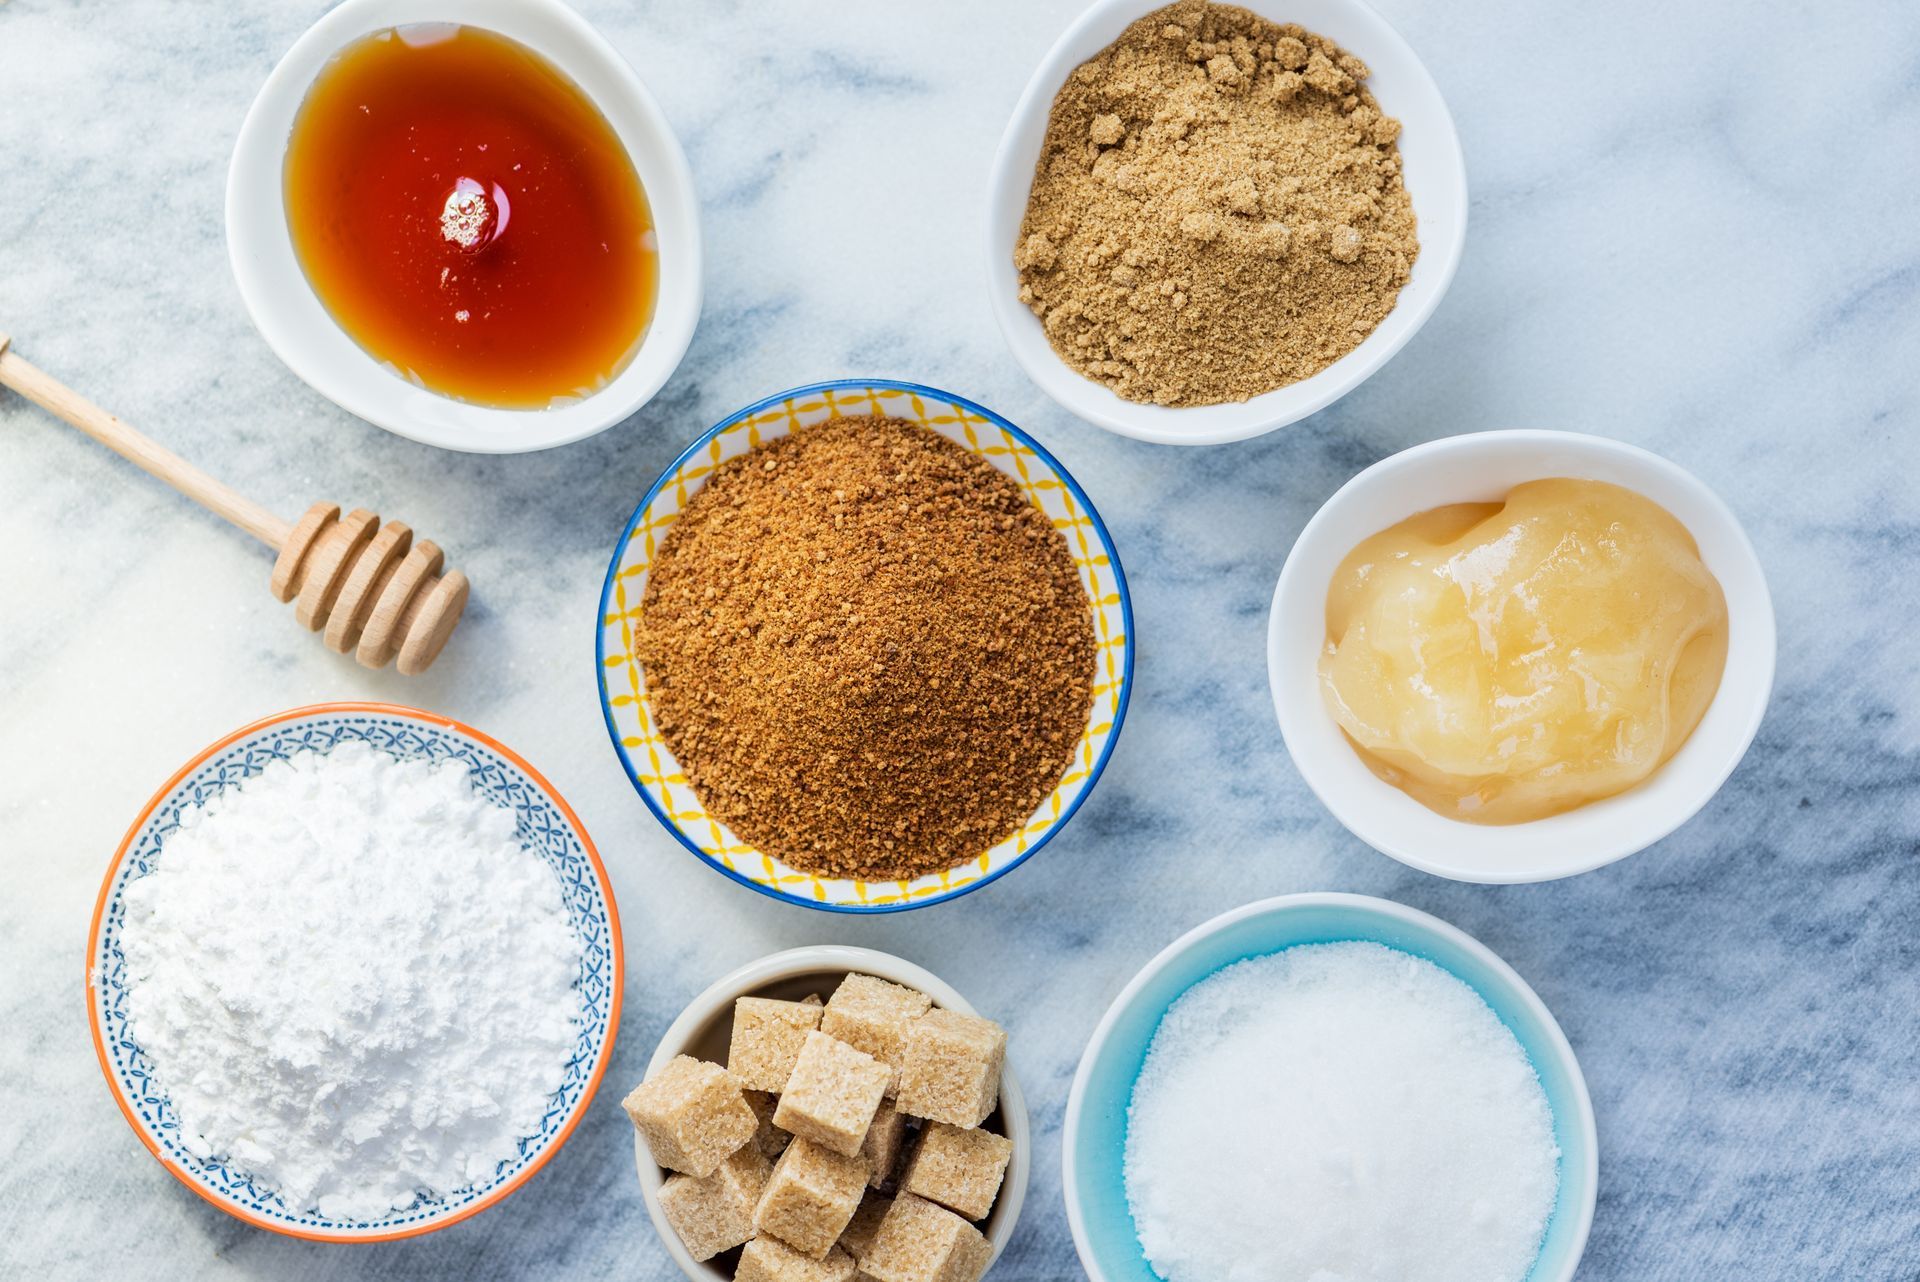 different types of sugars for baking including honey, powdered, granulated, demerara, etc.